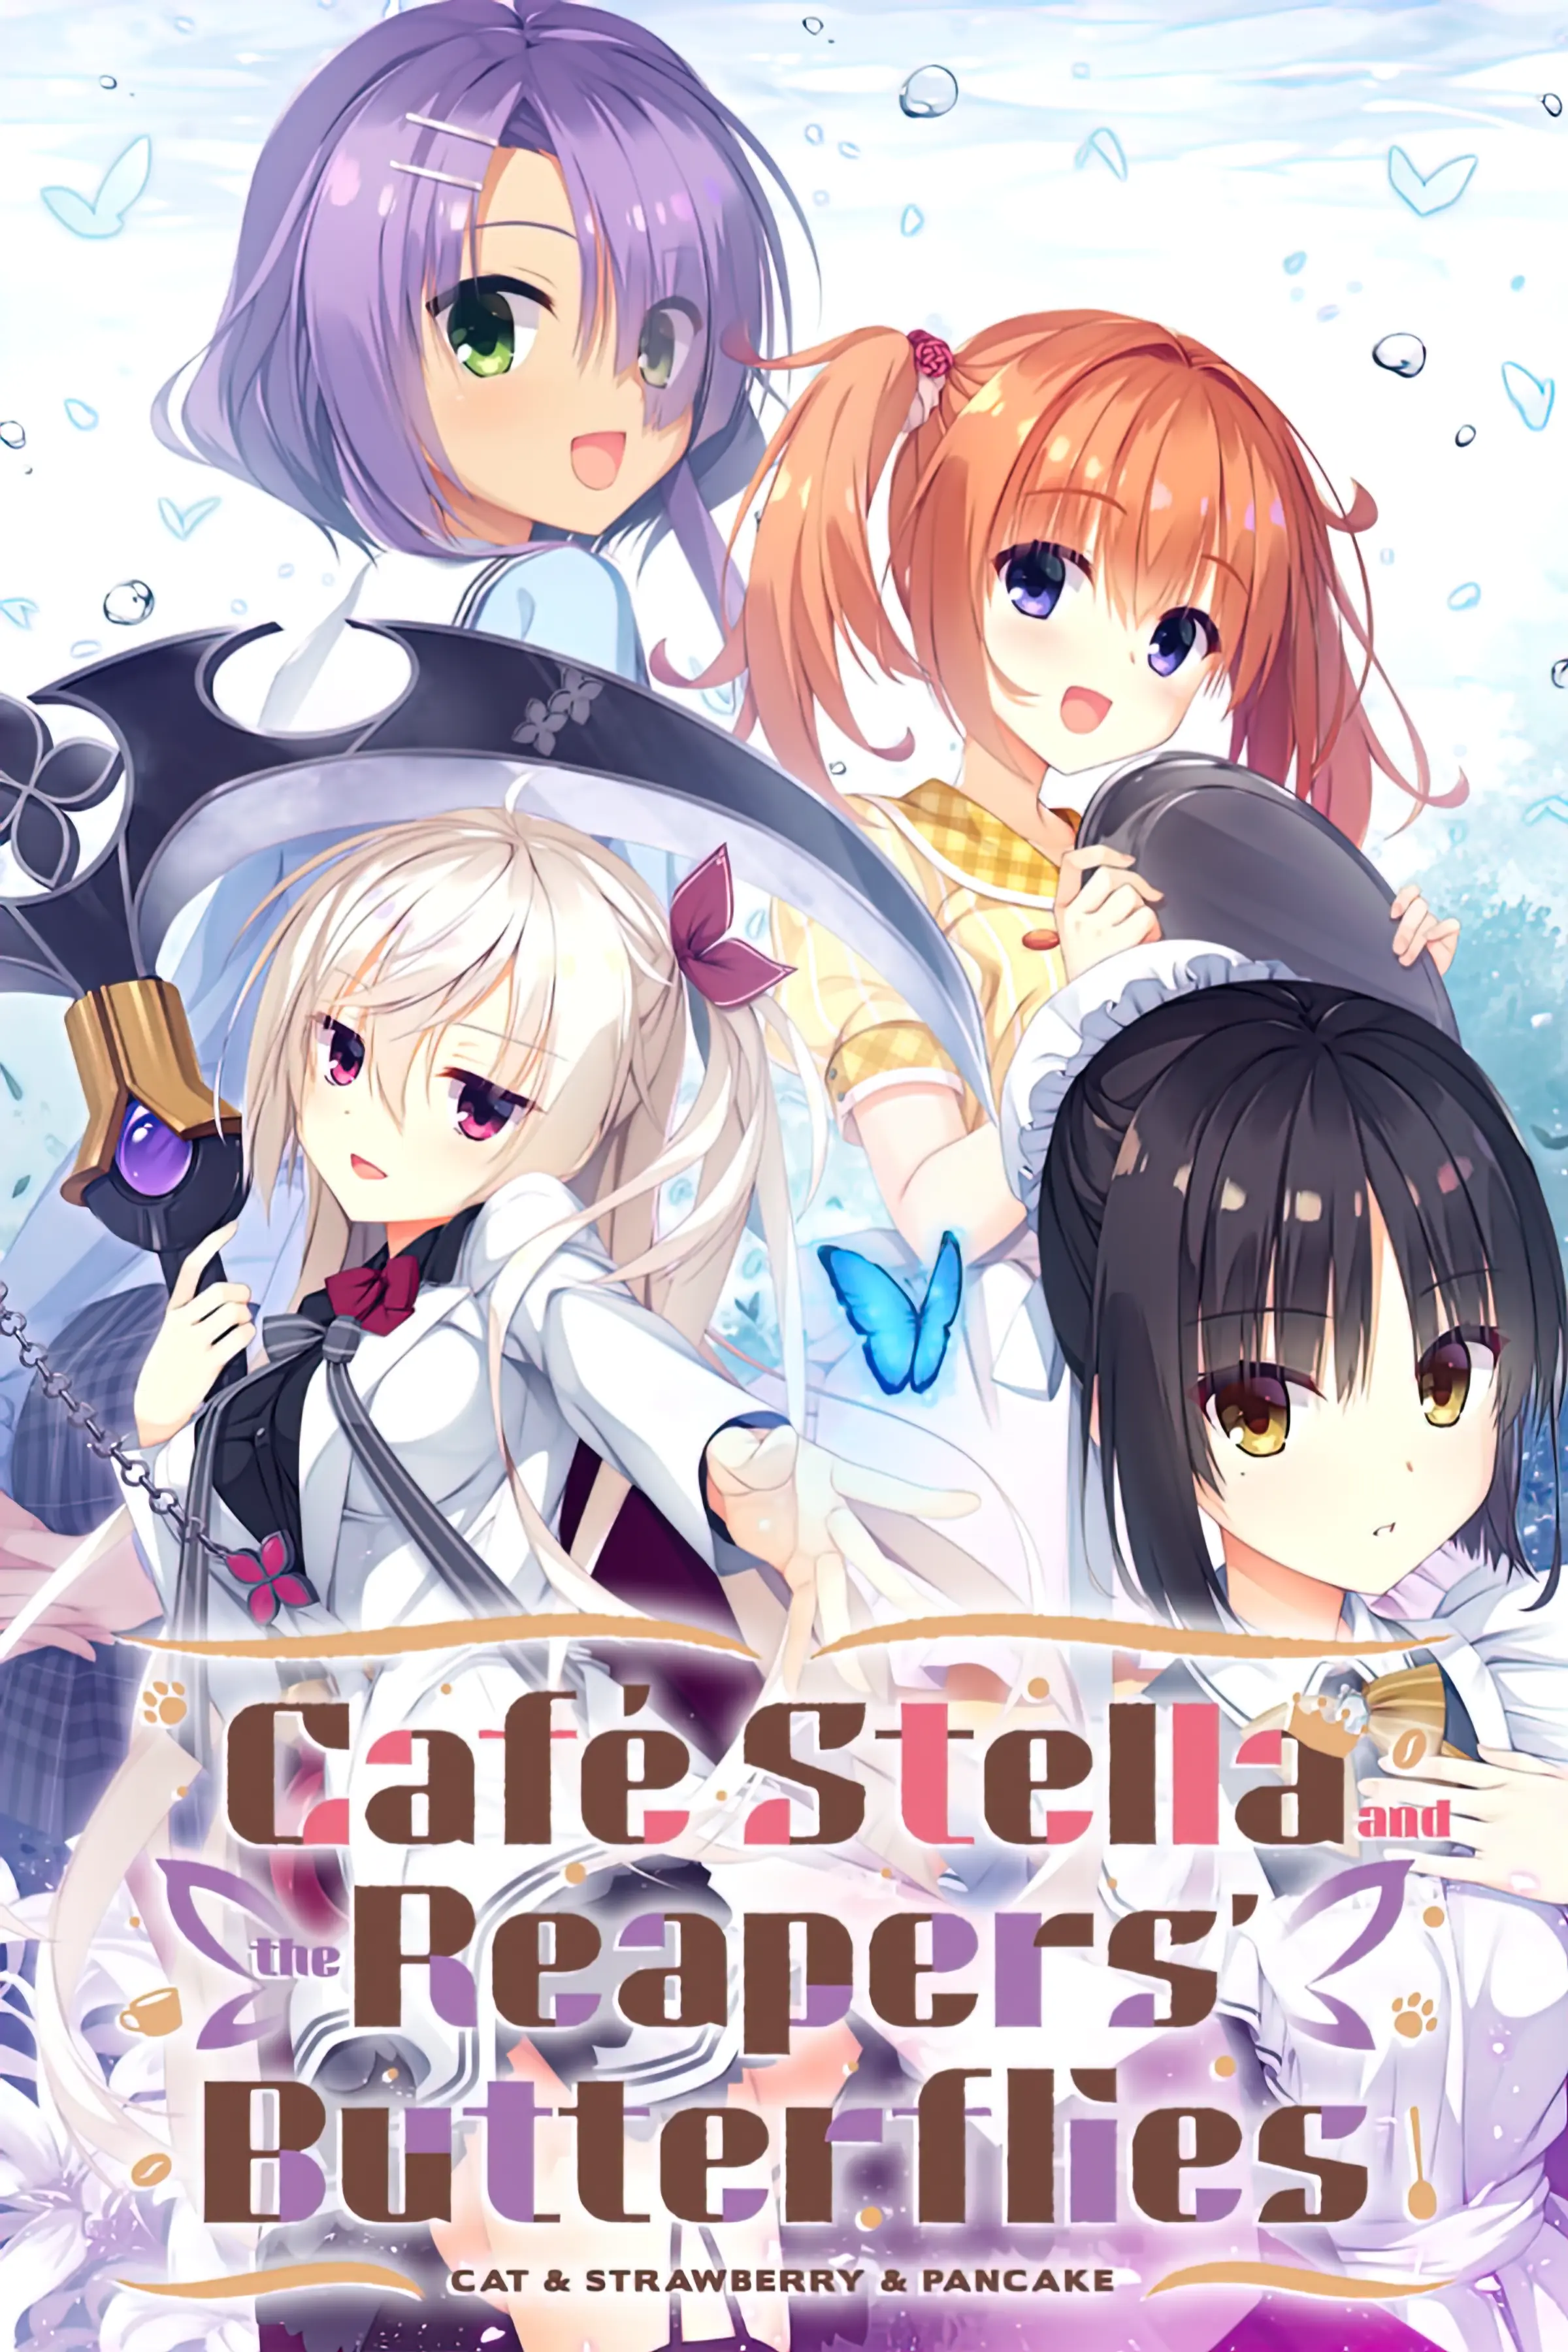 Café Stella and the Reaper's Butterflies [v1.31] main image